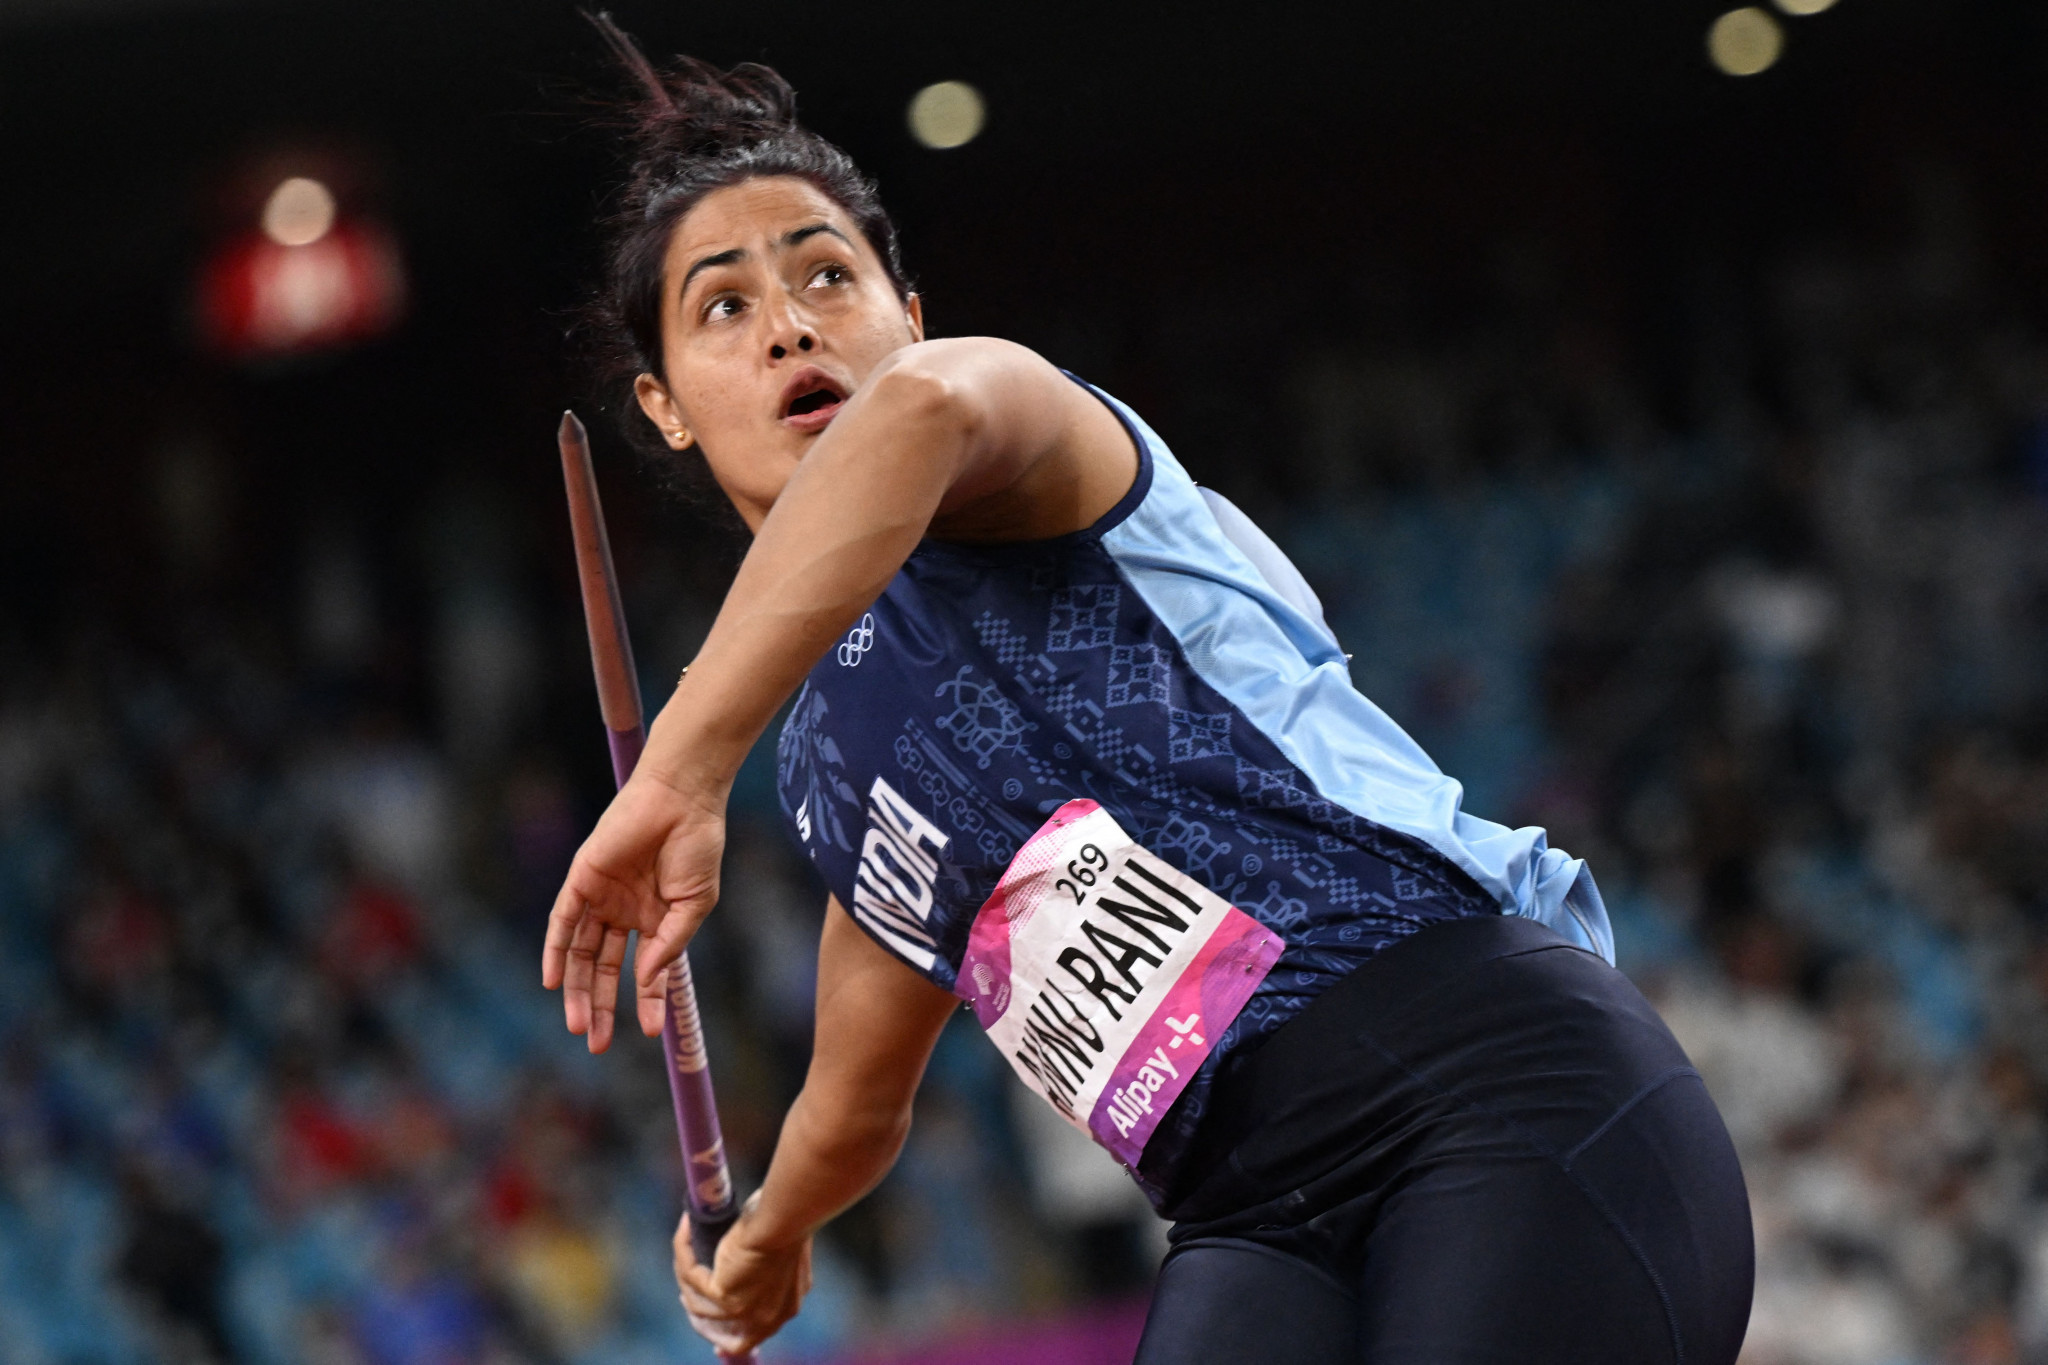 Annu Rani also won gold at Hangzhou 2022 to ensure India took a javelin double ©Getty Images